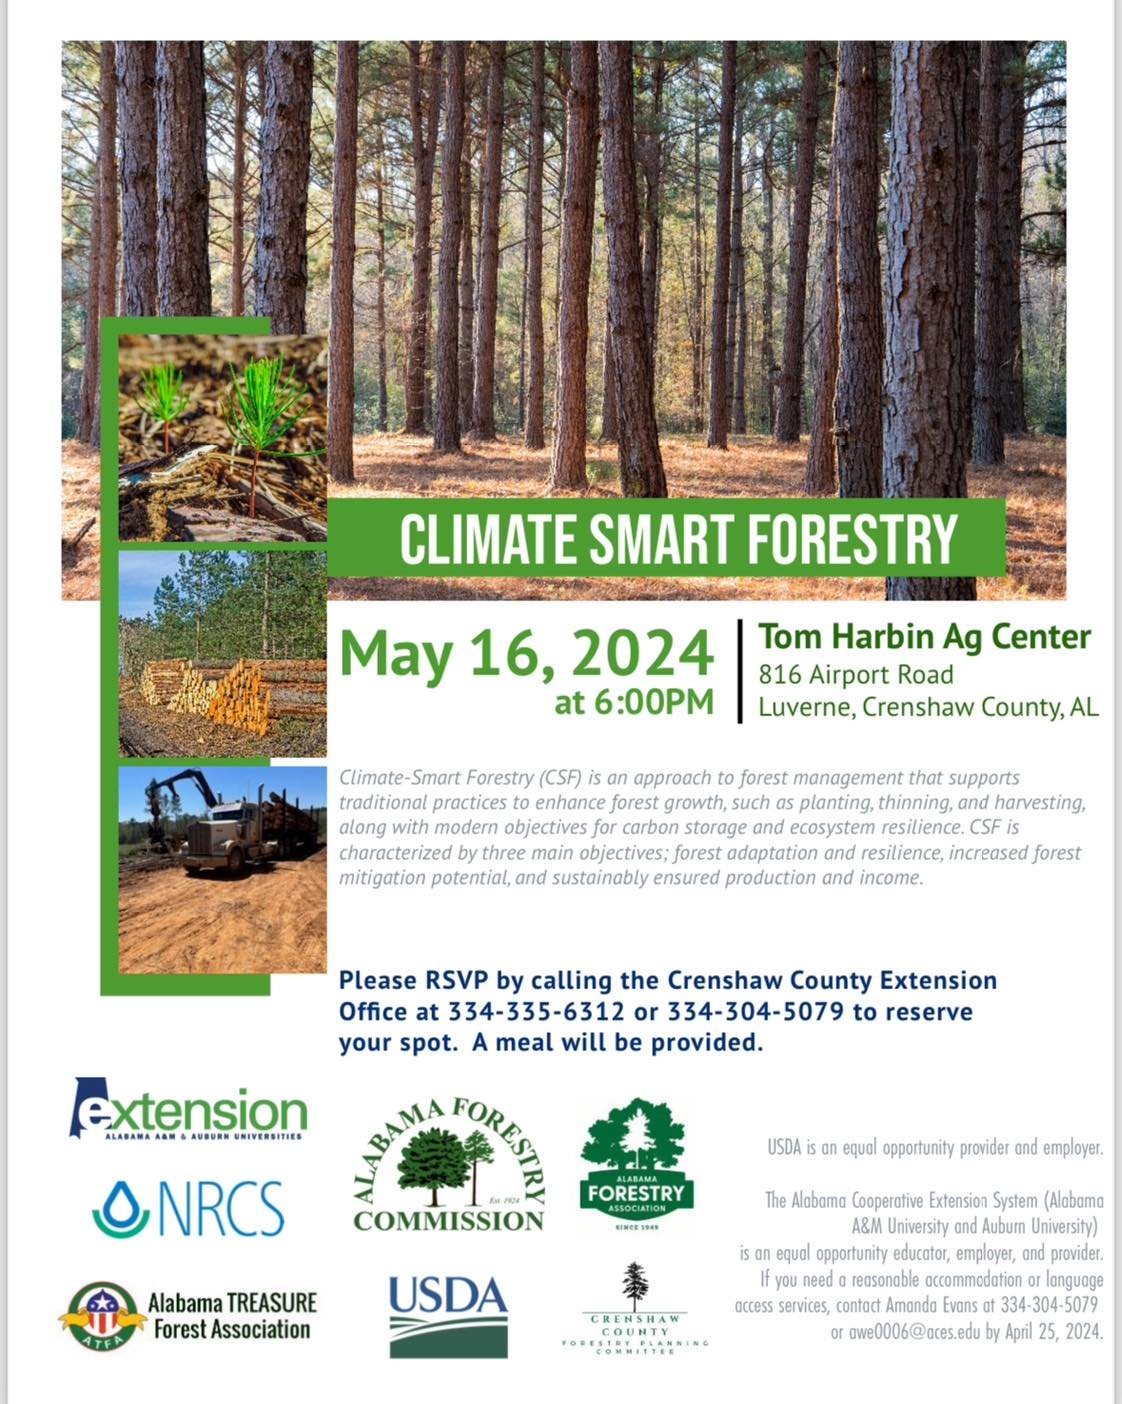 Planting, thinning, and harvesting are all part of Climate Smart Forestry. 🌳🌲